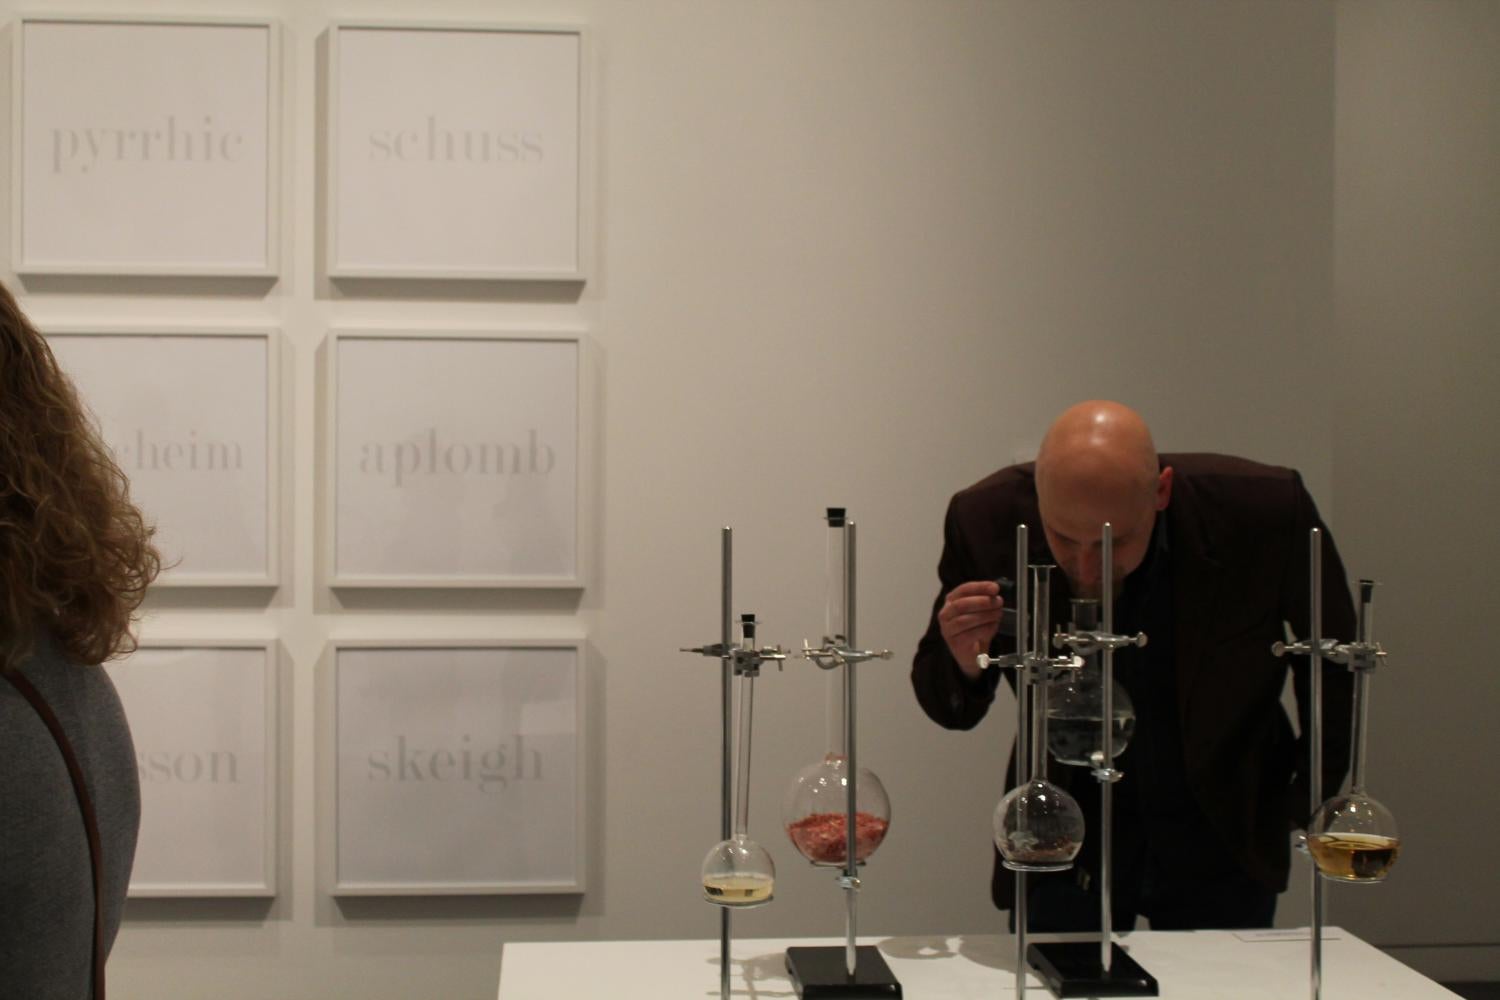 A man looks at a scientific instrument that's part of an art installation.